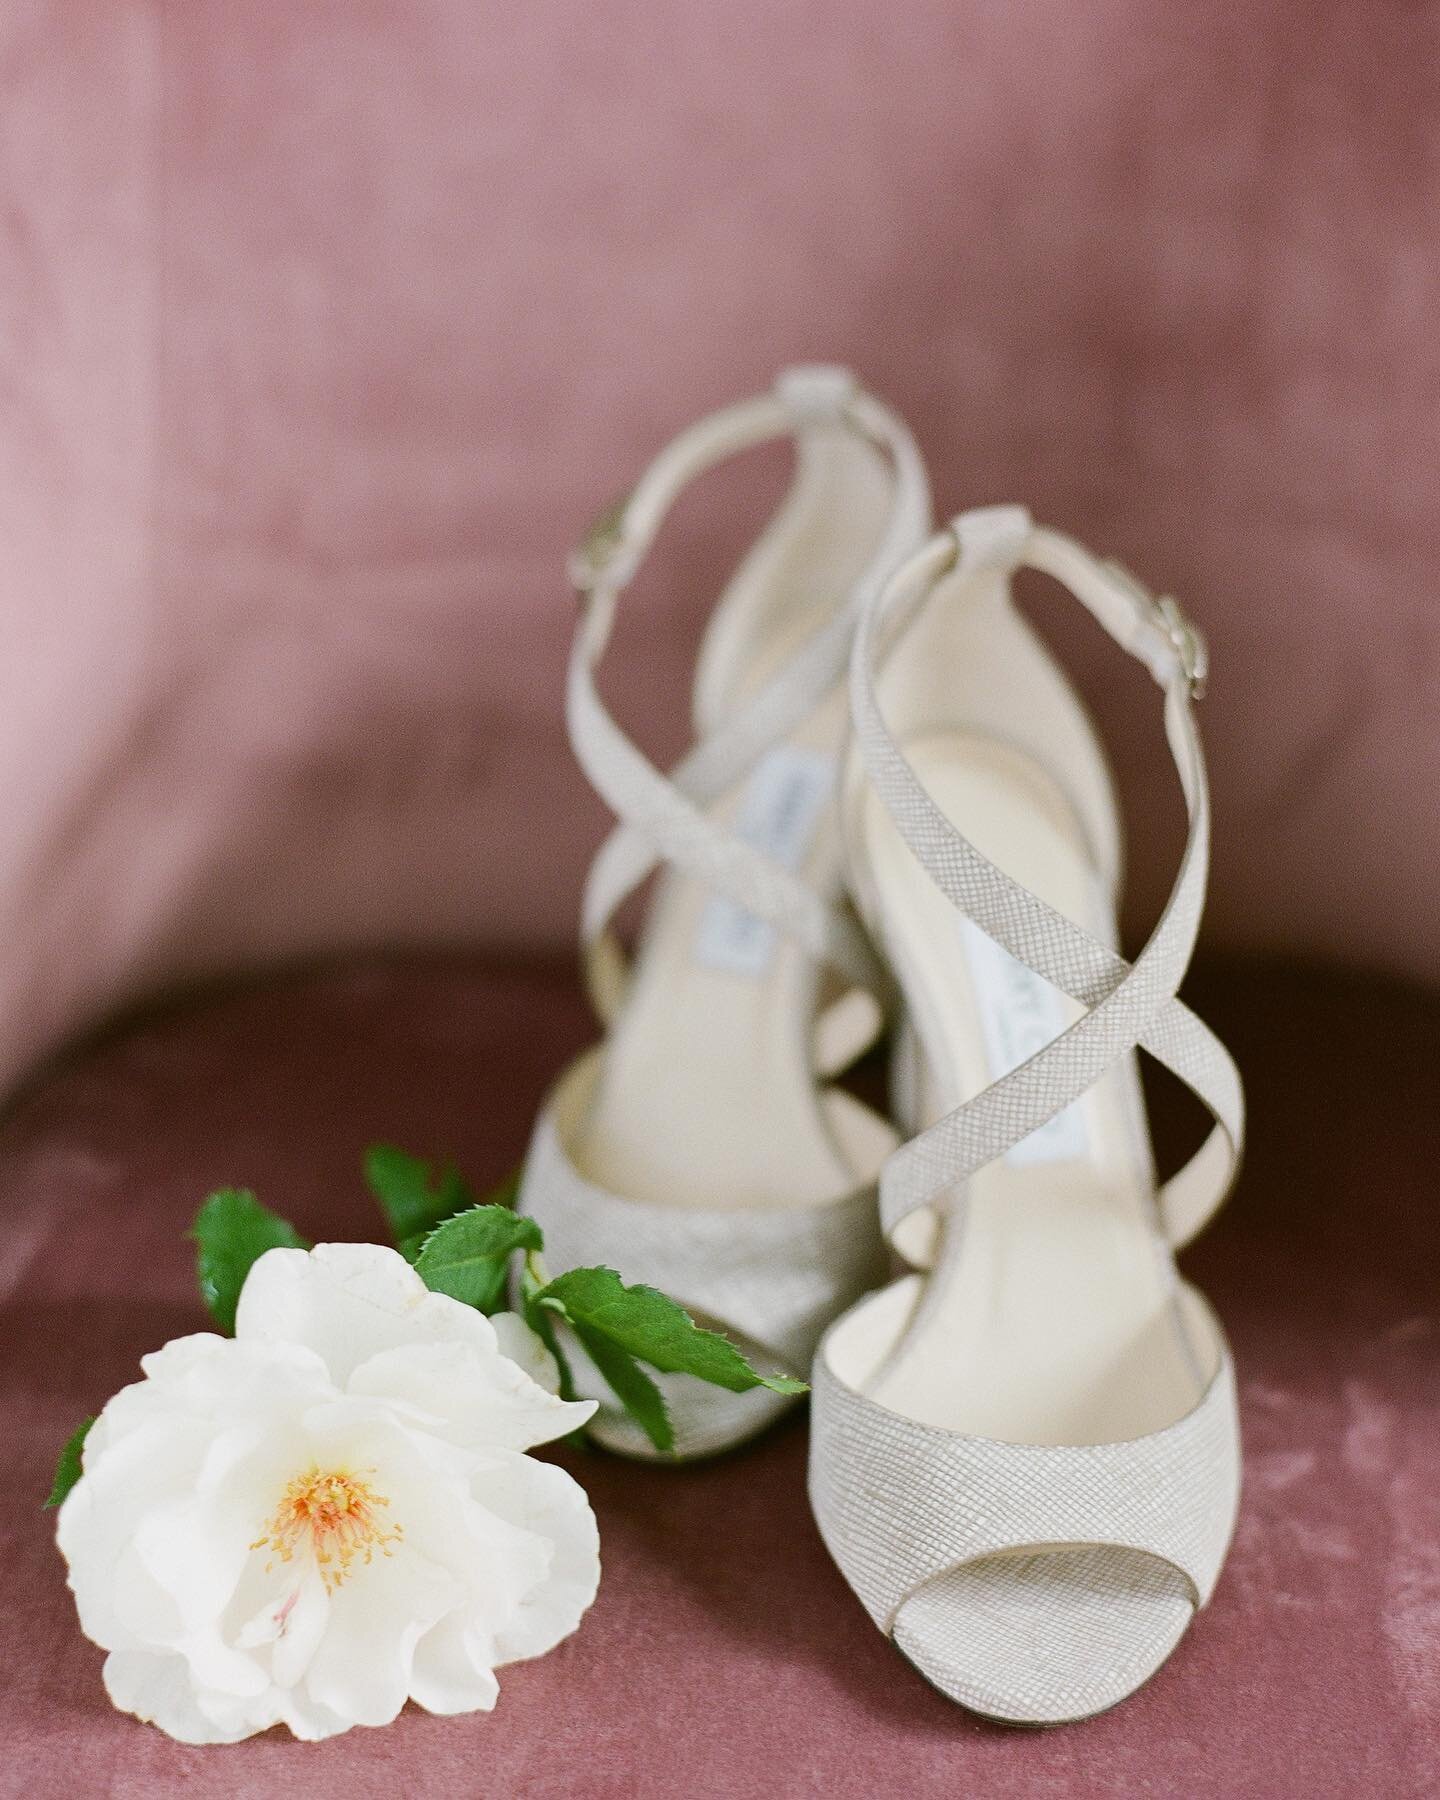 Jimmy Choo goodness for this bride&rsquo;s special day. 🤍
.
.
.
.
.
.
#katieparraphotography #seattlephotographer #weddingphotographer #seattleweddingphotographer #weddingshoes #jimmychoo #film